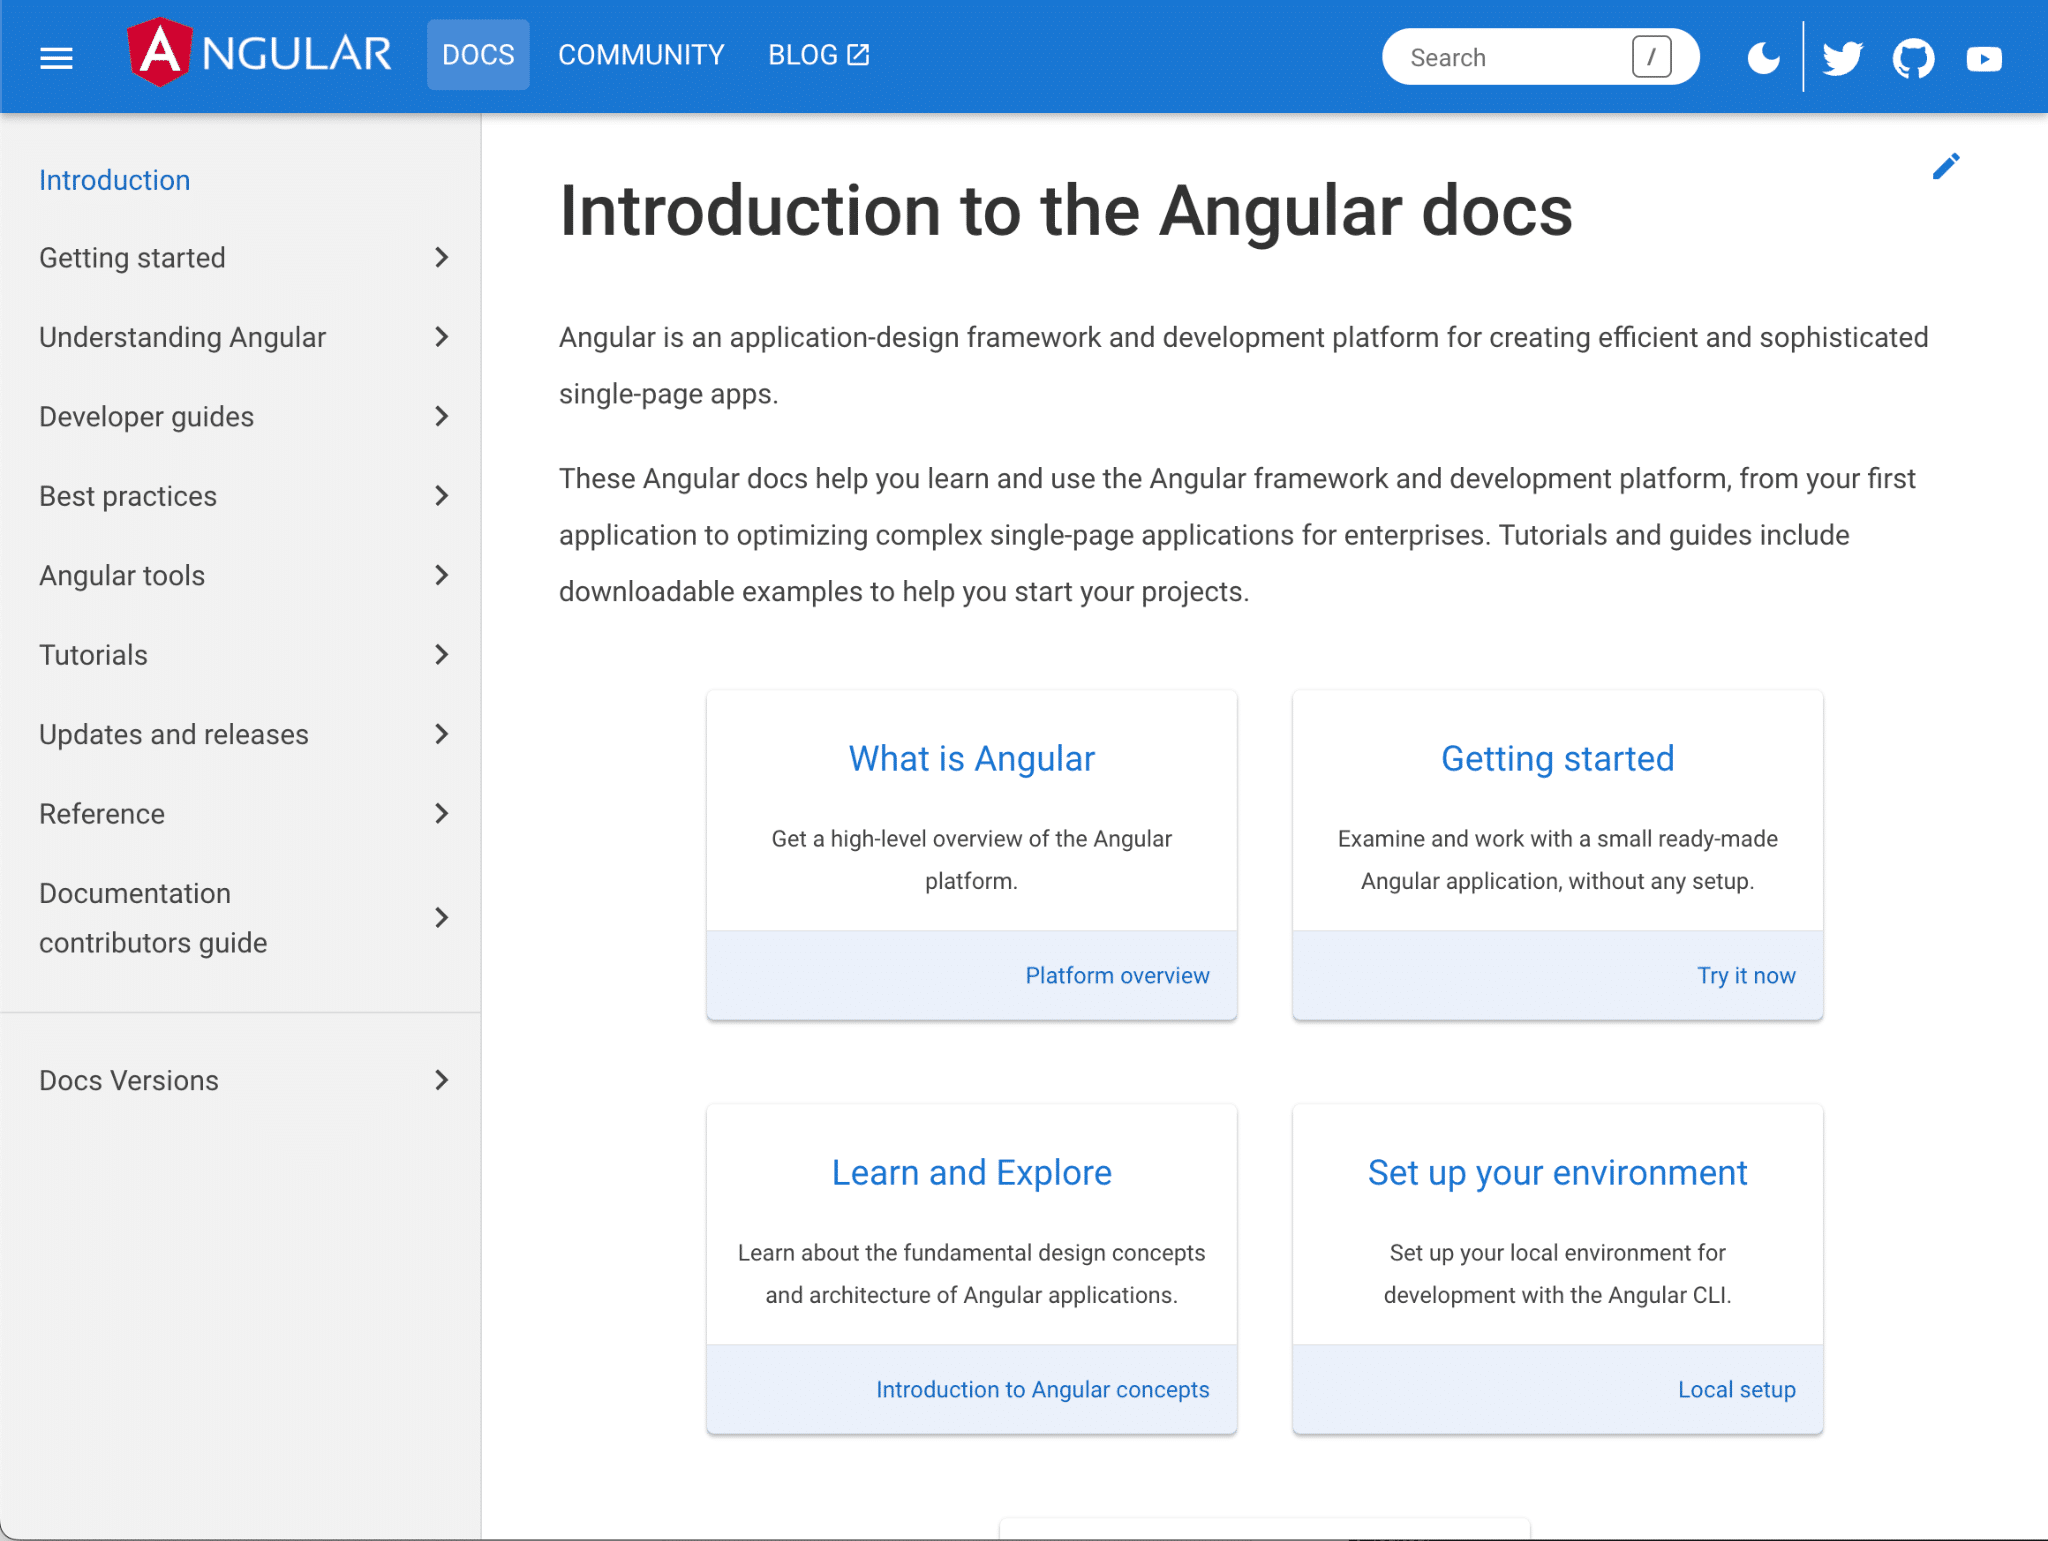 Consult the Angular documentation to fix the package Angular core is not a dependency error